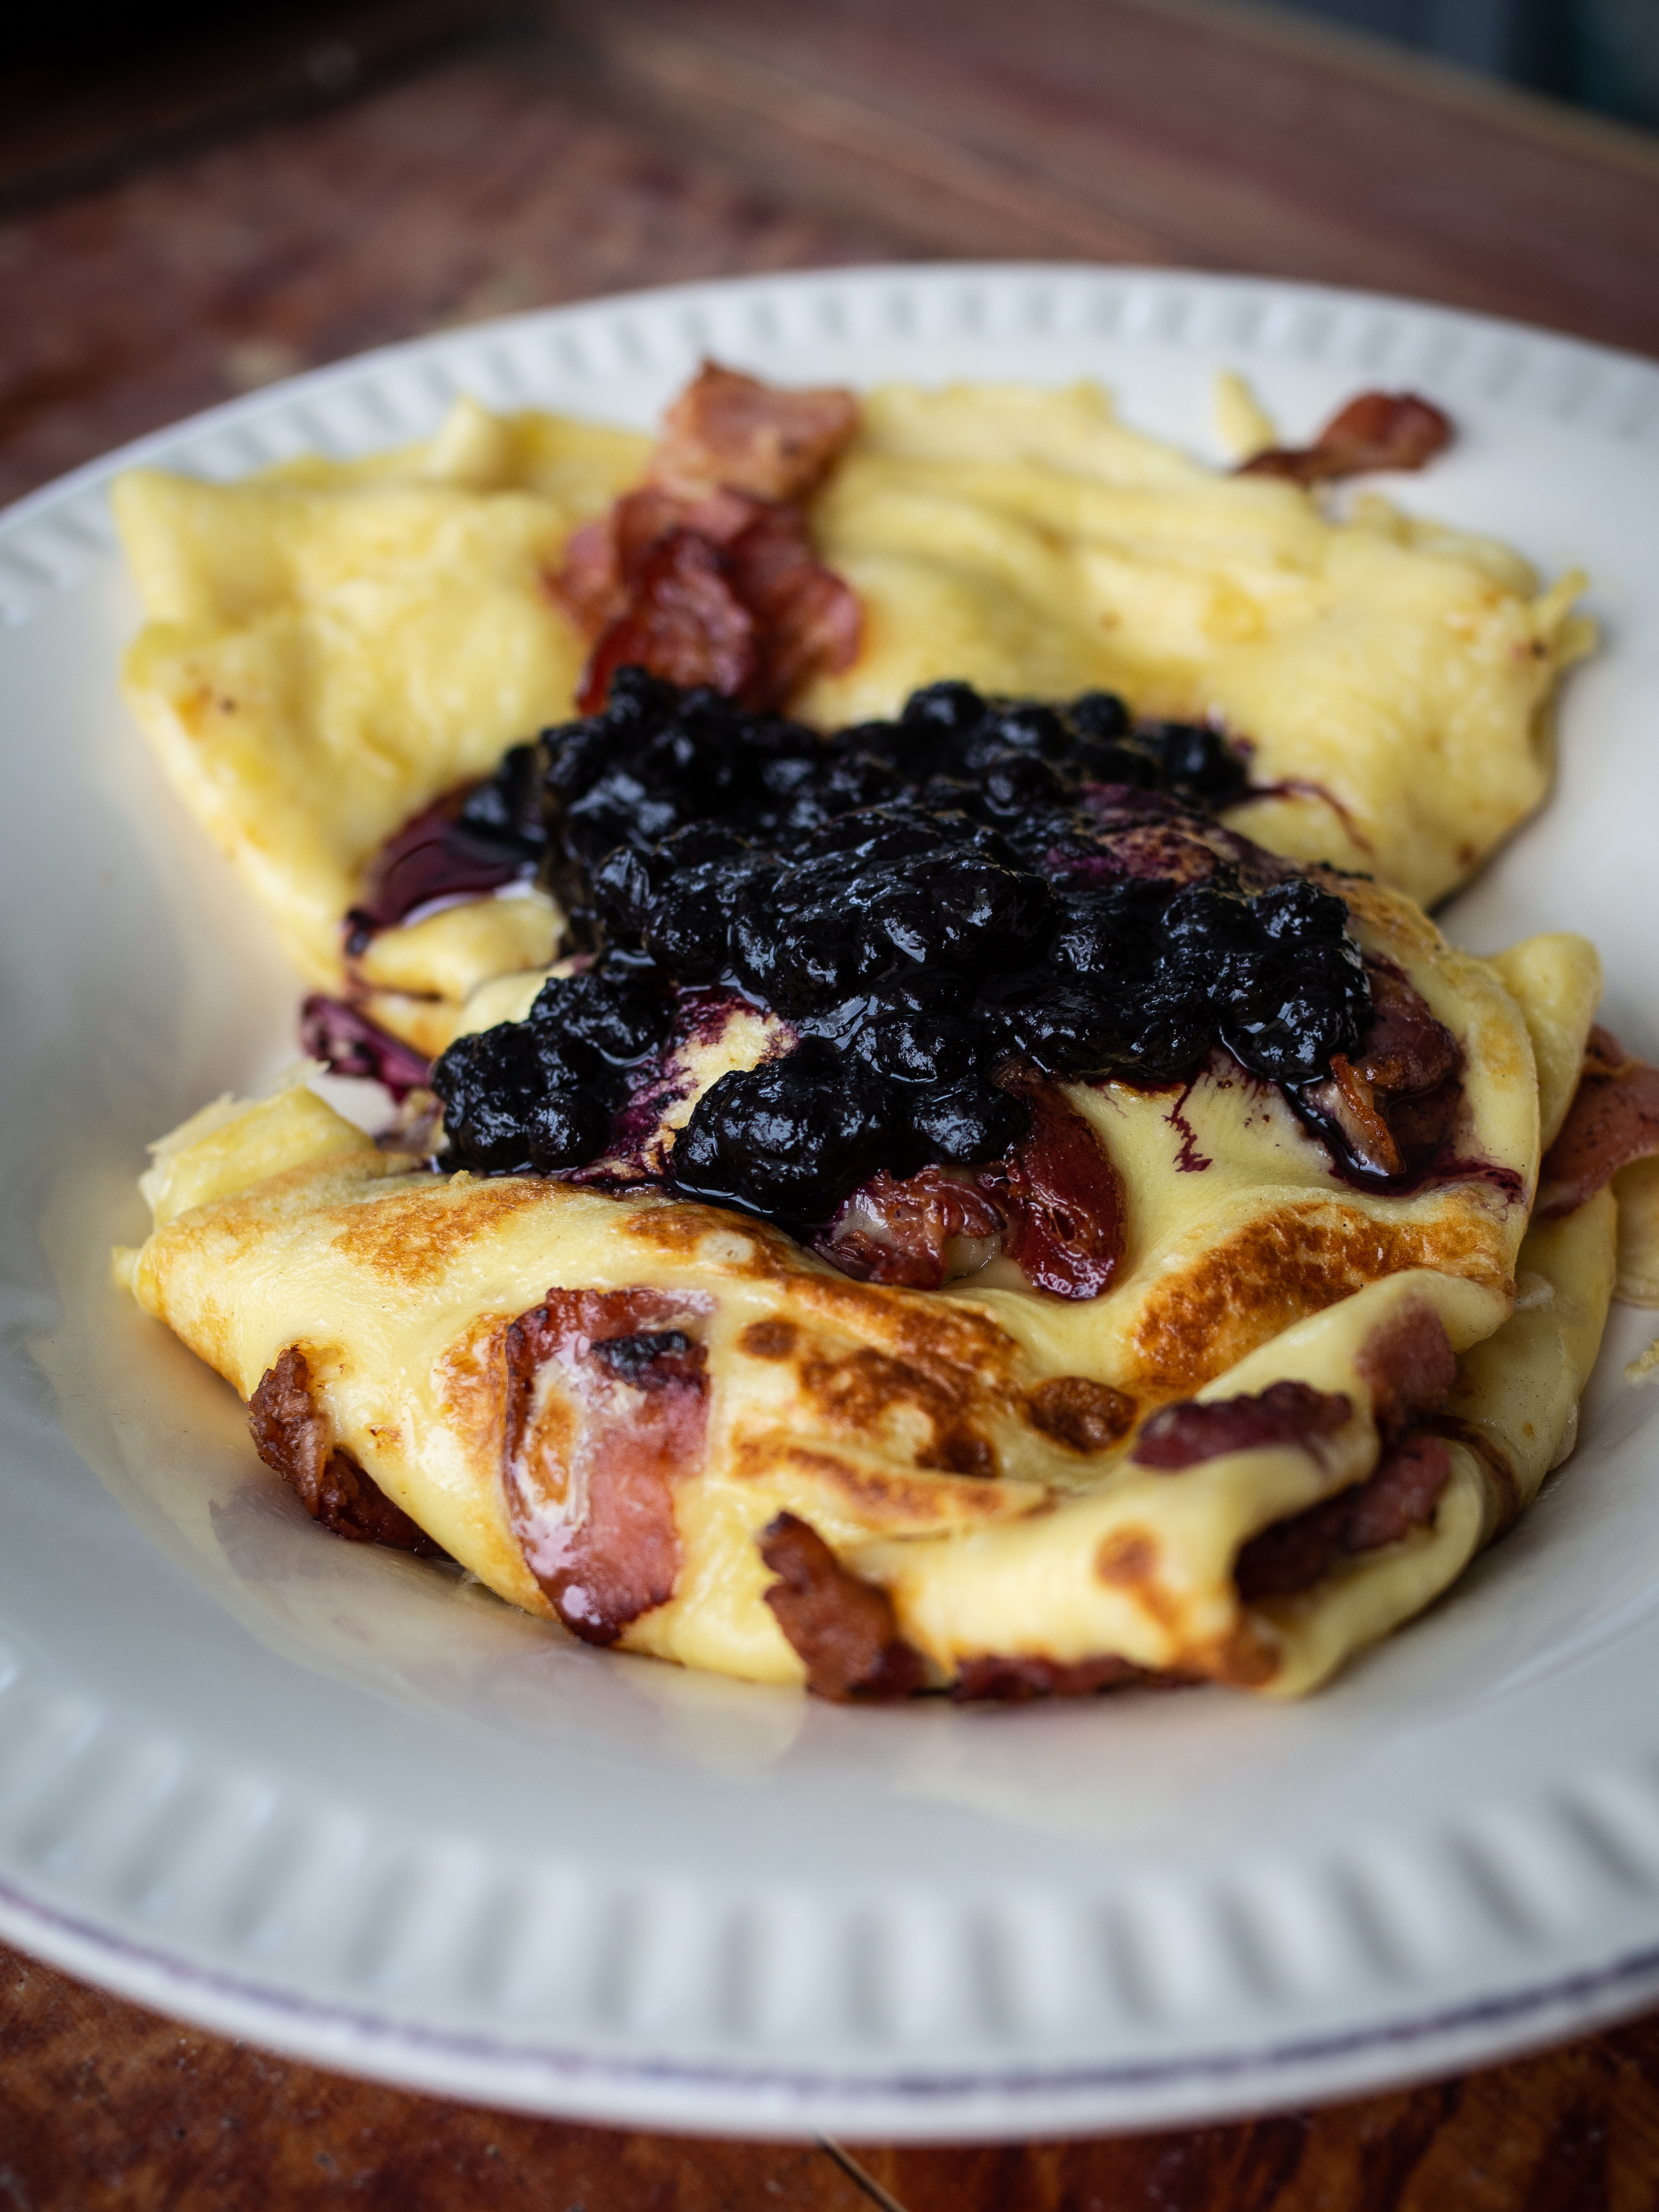 Norwegian Pancakes with Bacon, Sirup and Blueberry Compote (Fleskepannekaker)